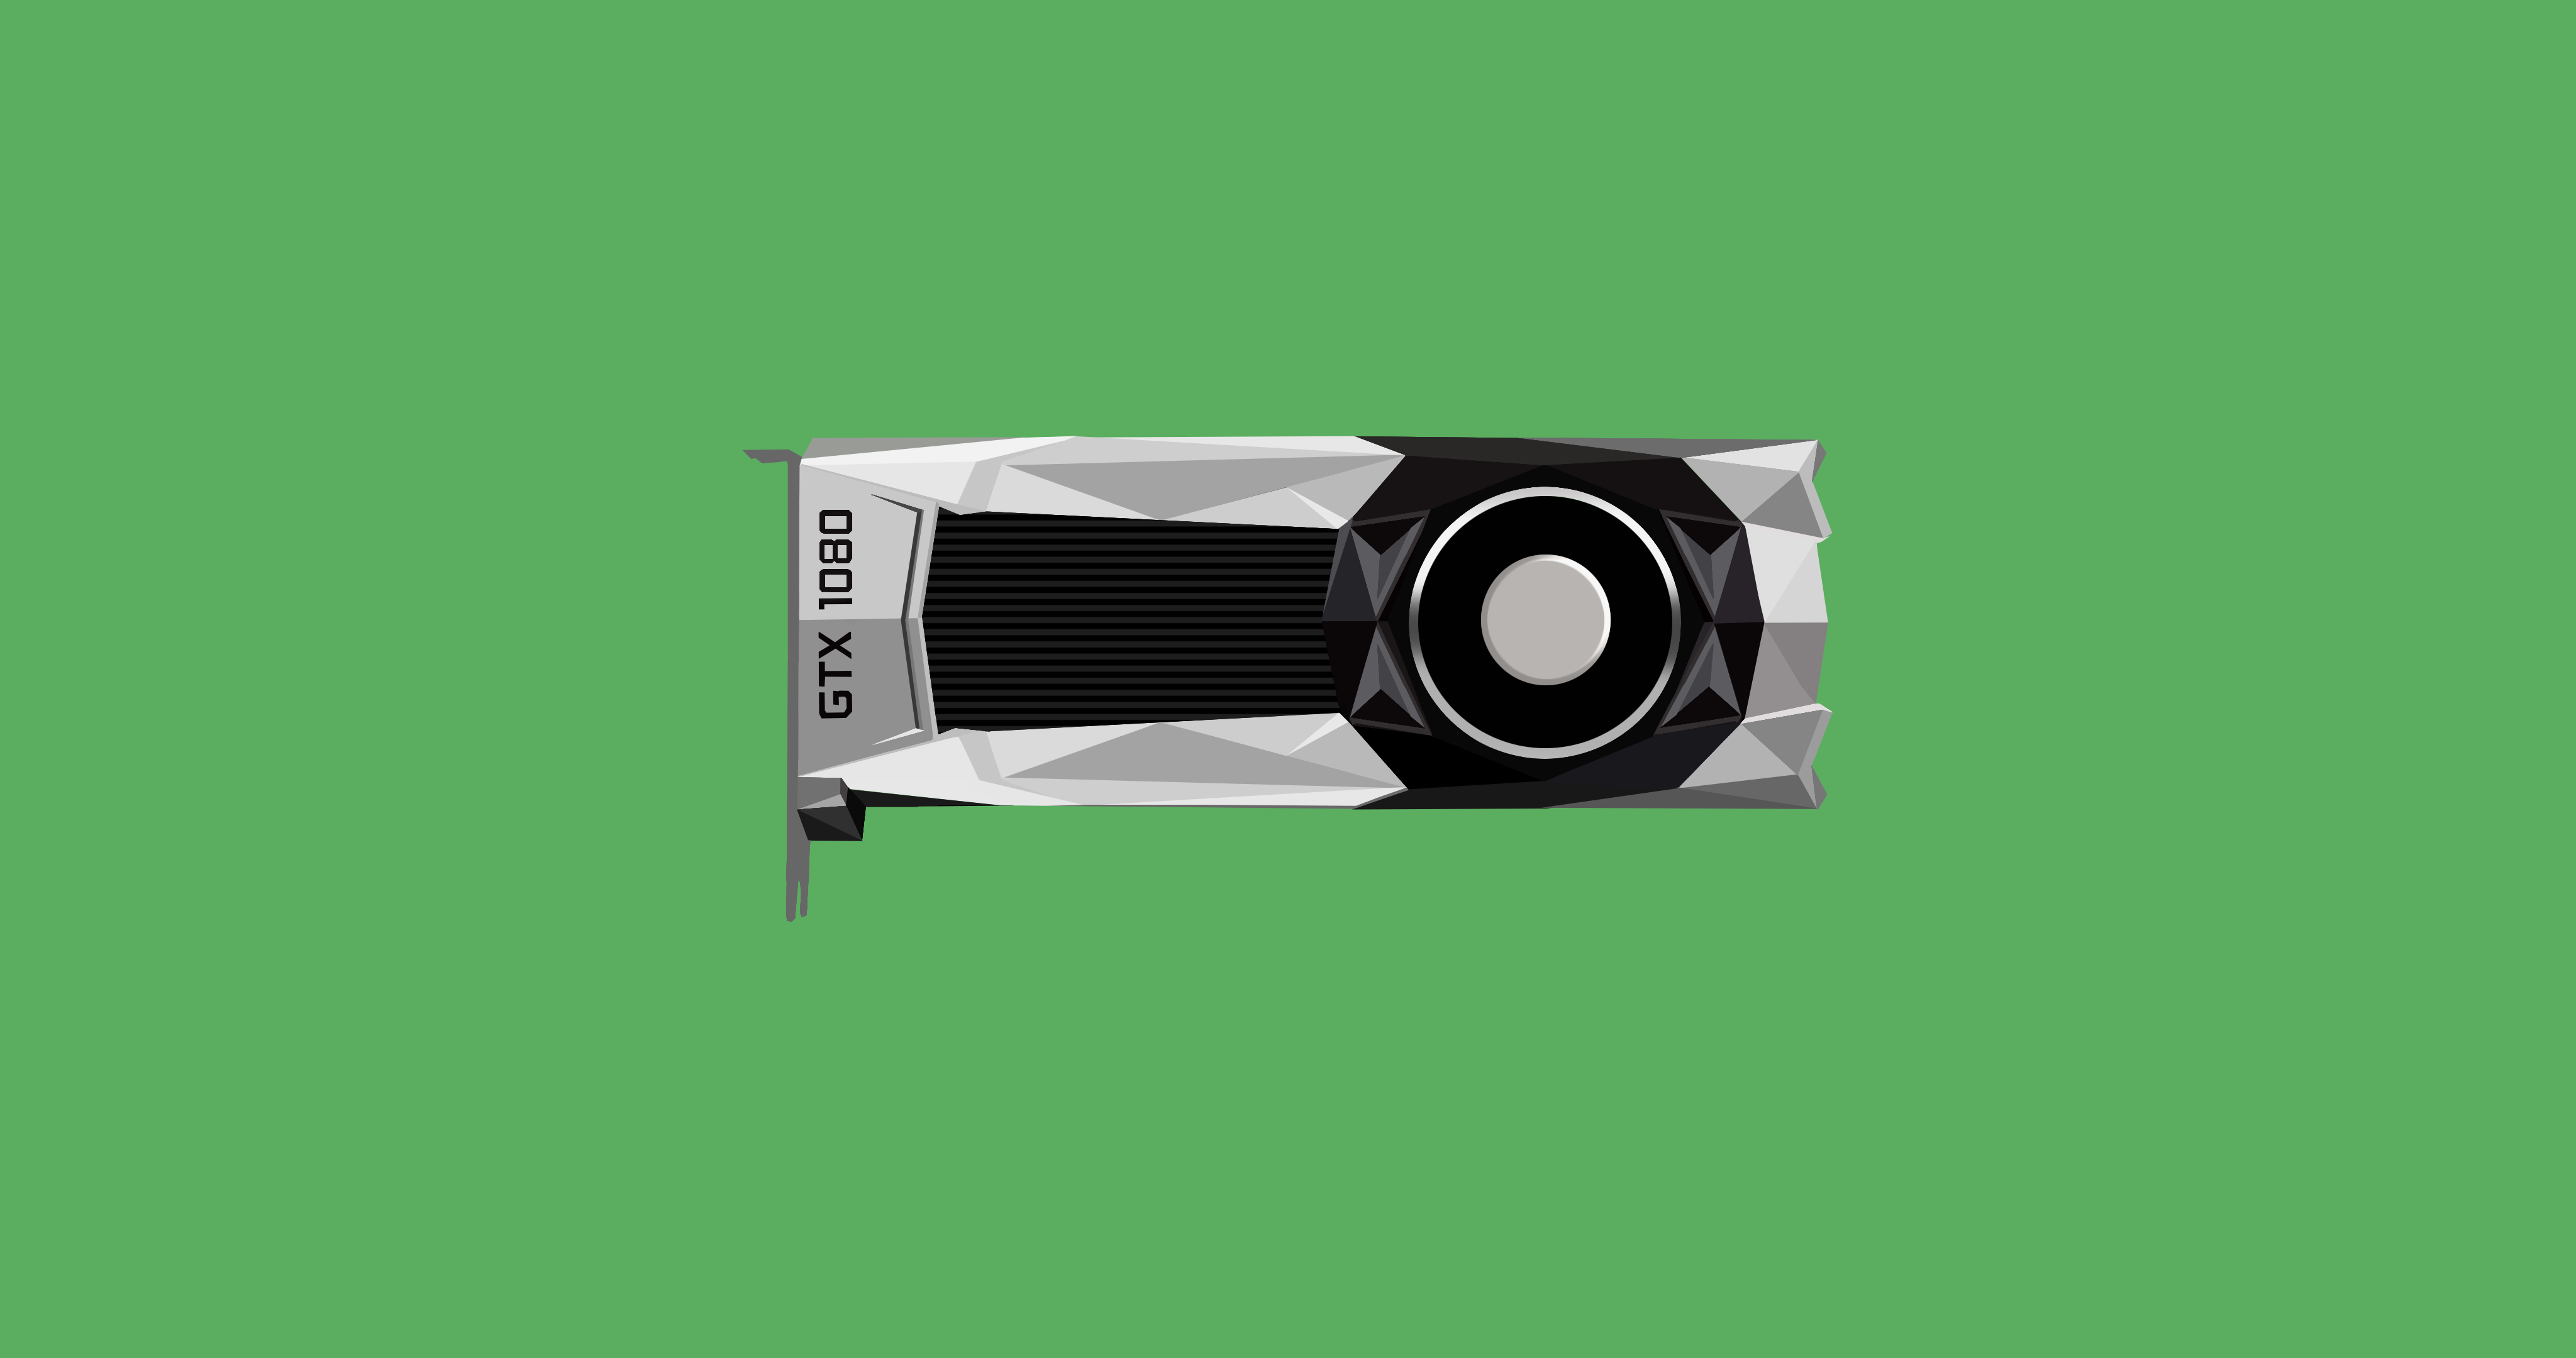 Glorious GTX 1080 wallpaper for y'all! I hope you like it!: pcmasterrace